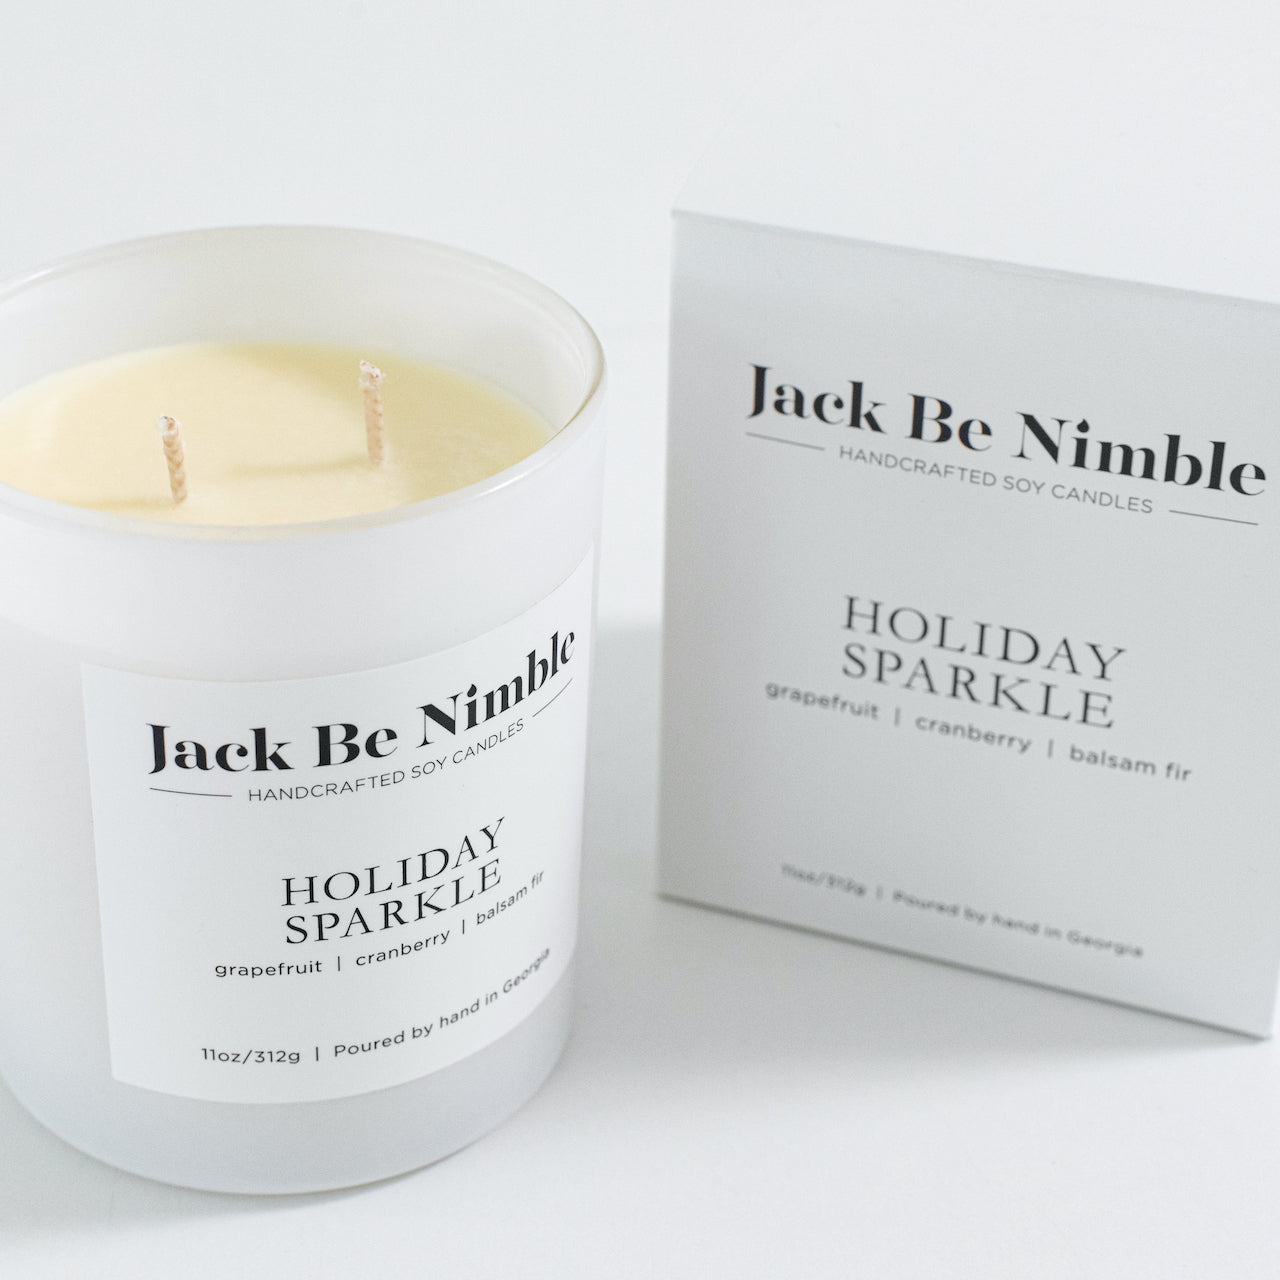 11 oz Holiday Sparkle Soy Candle